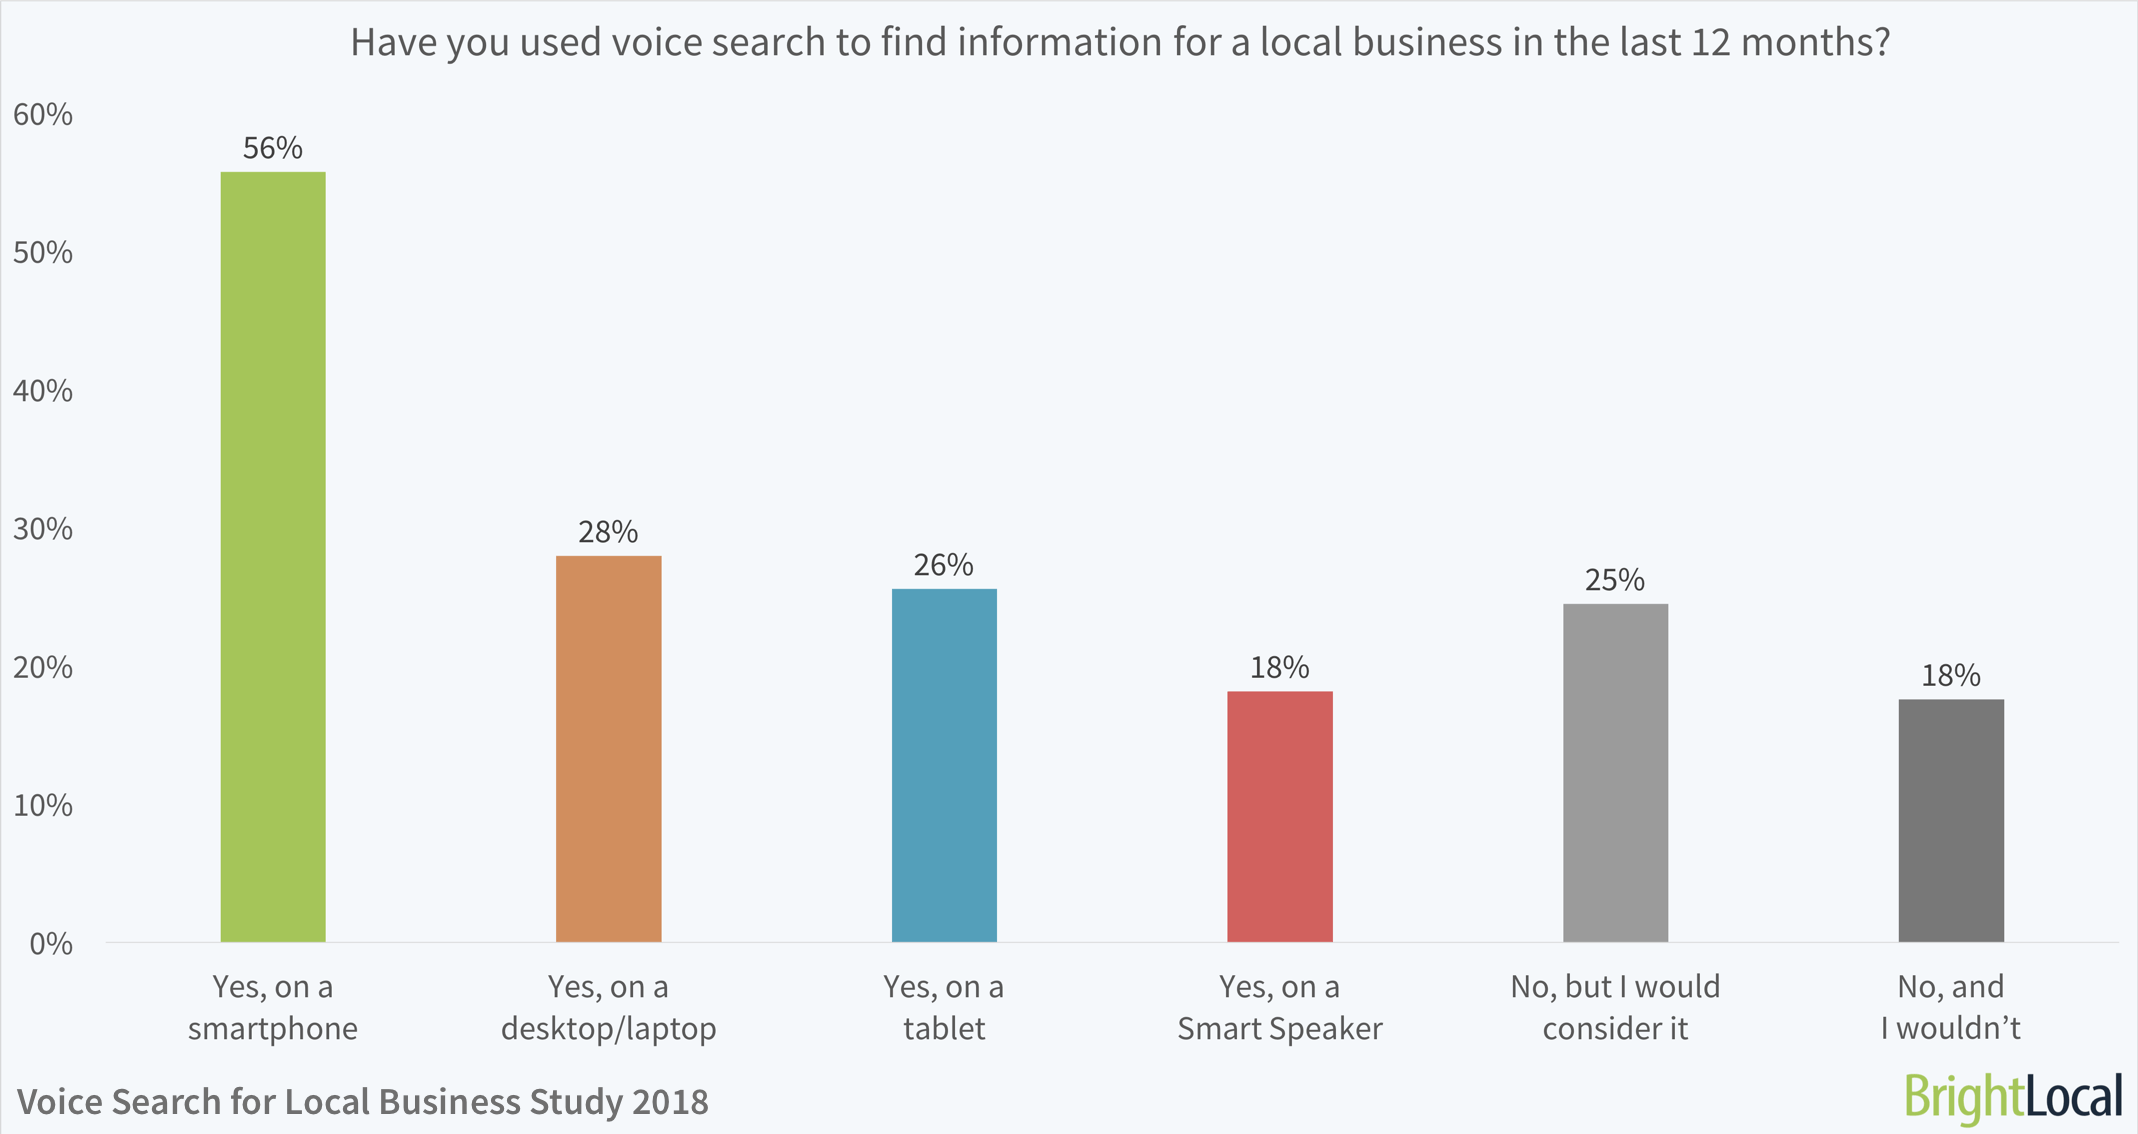 Have you used voice search to find information for a local business in the last 12 months? | BrightLocal Voice Search for Local Business Study 